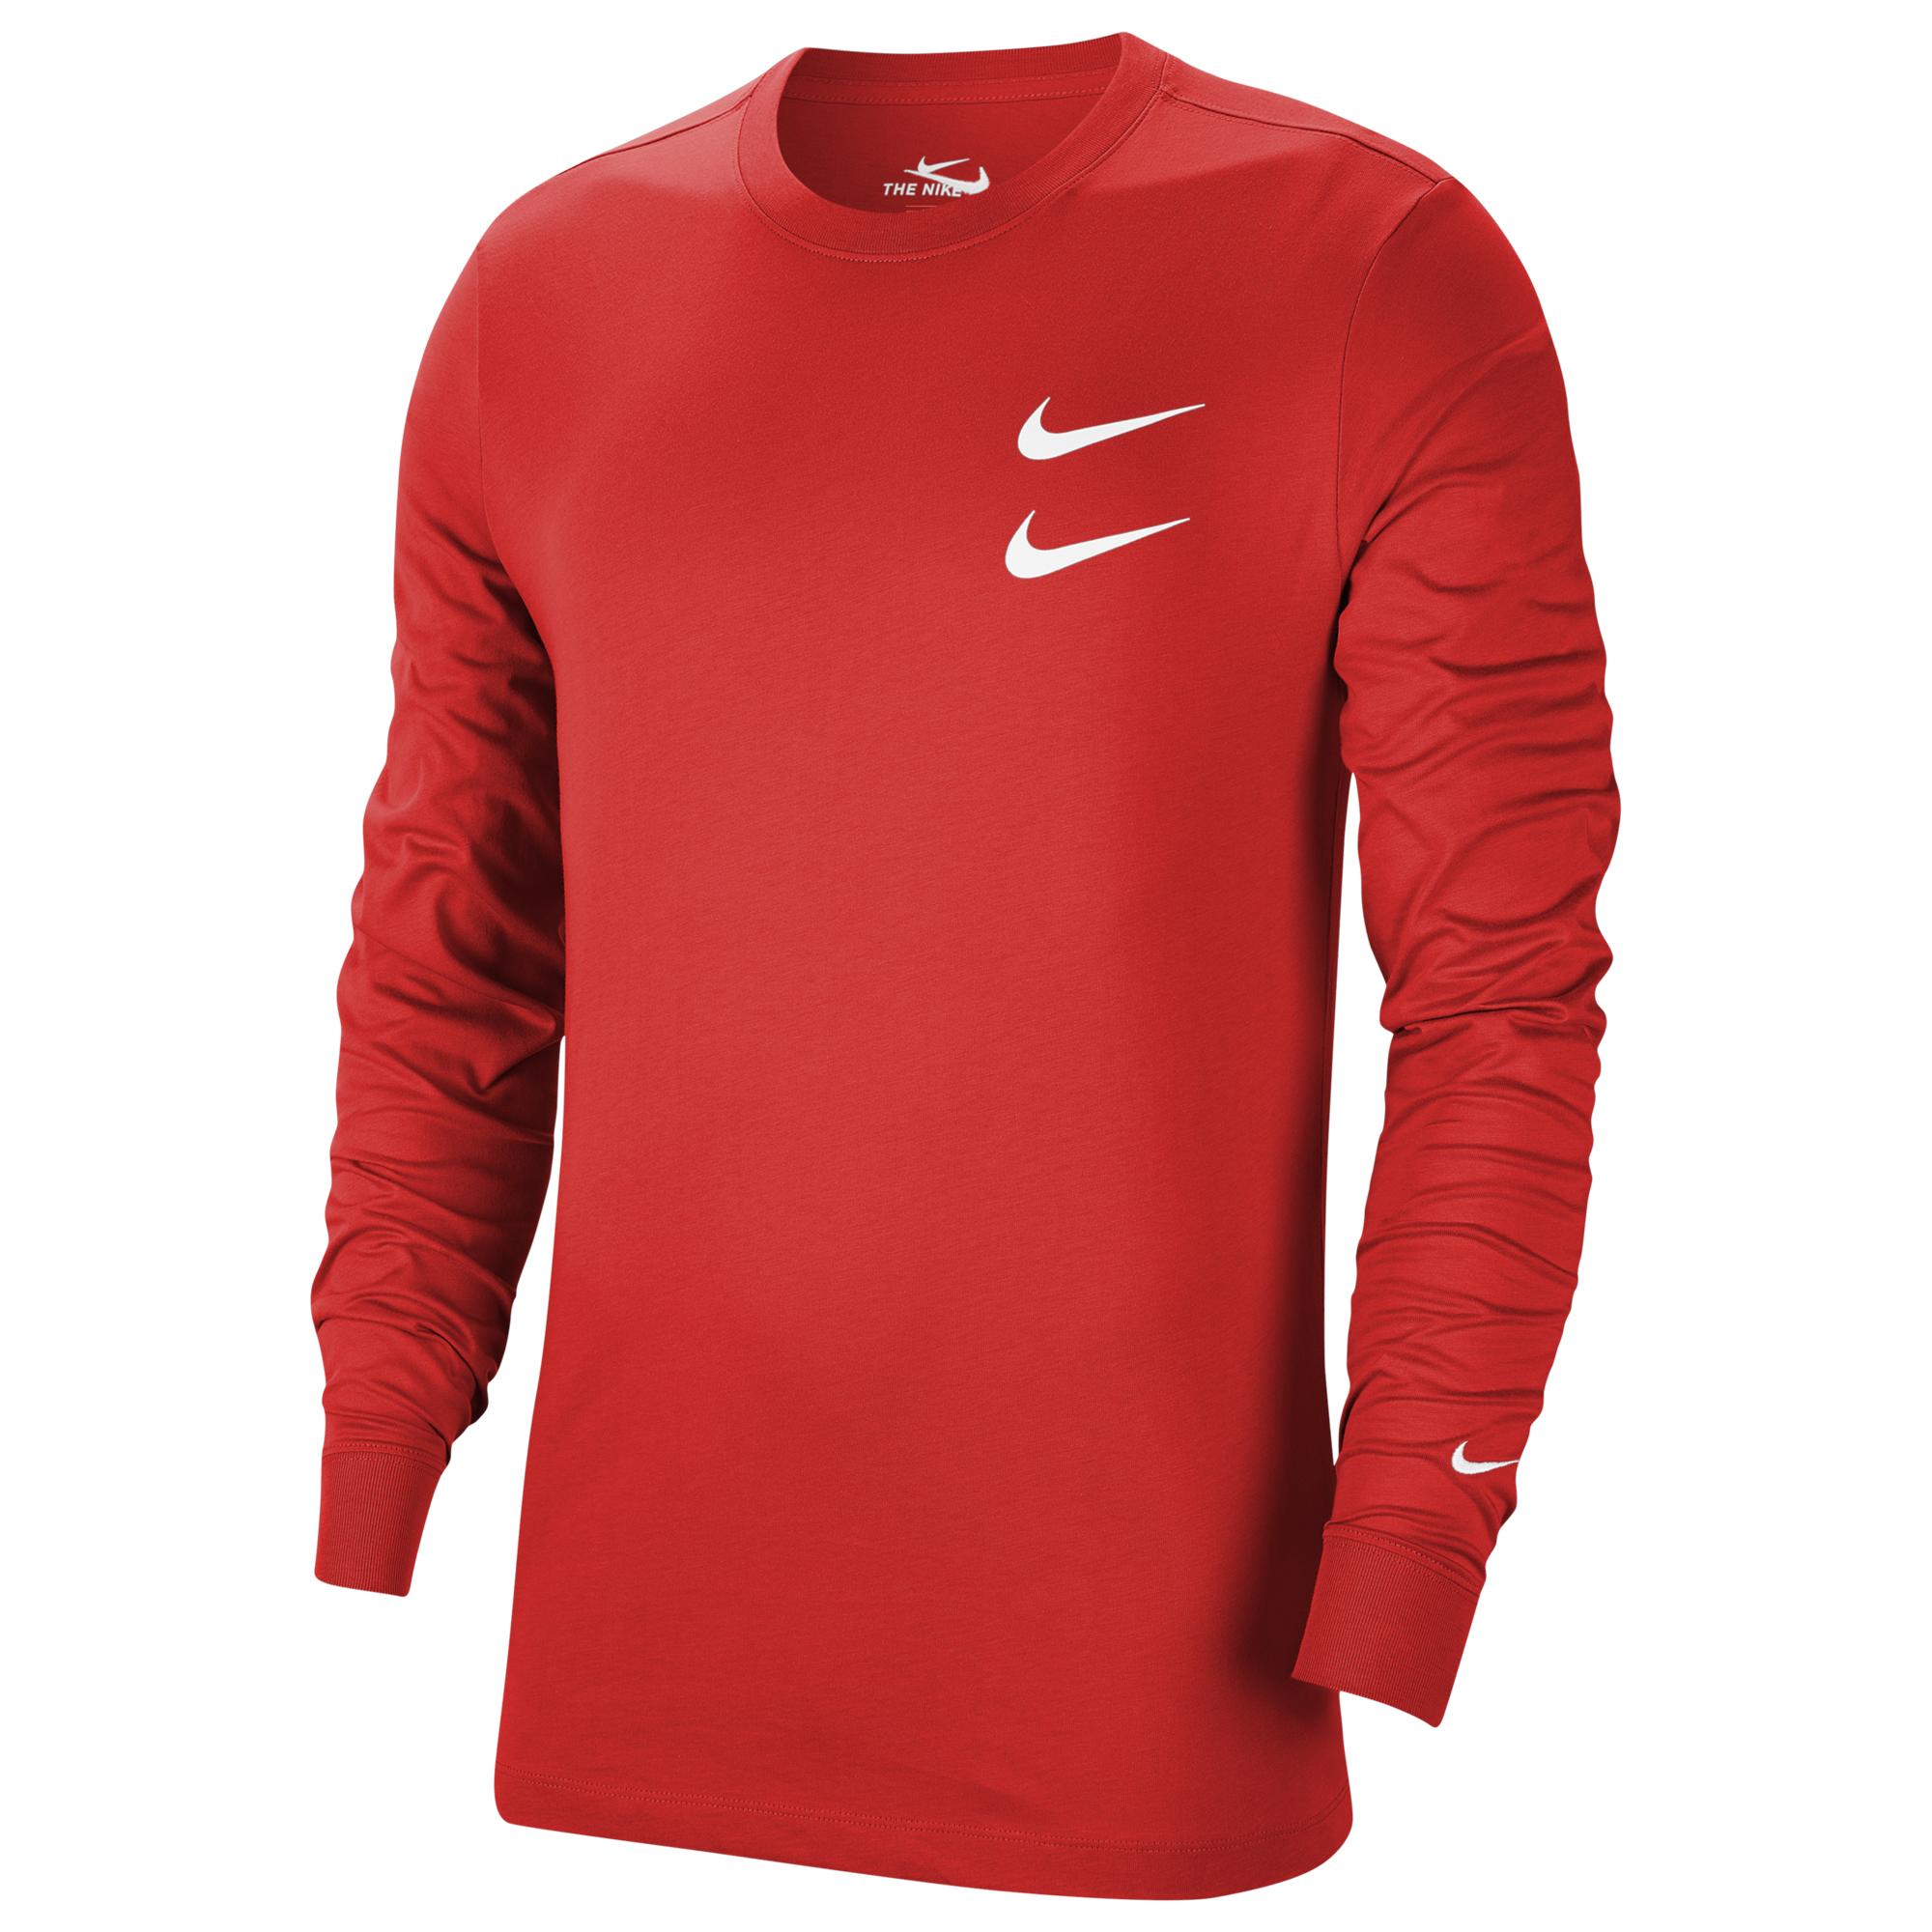 Nike Cotton Double Swoosh Long Sleeve T-shirt in Red for Men - Lyst